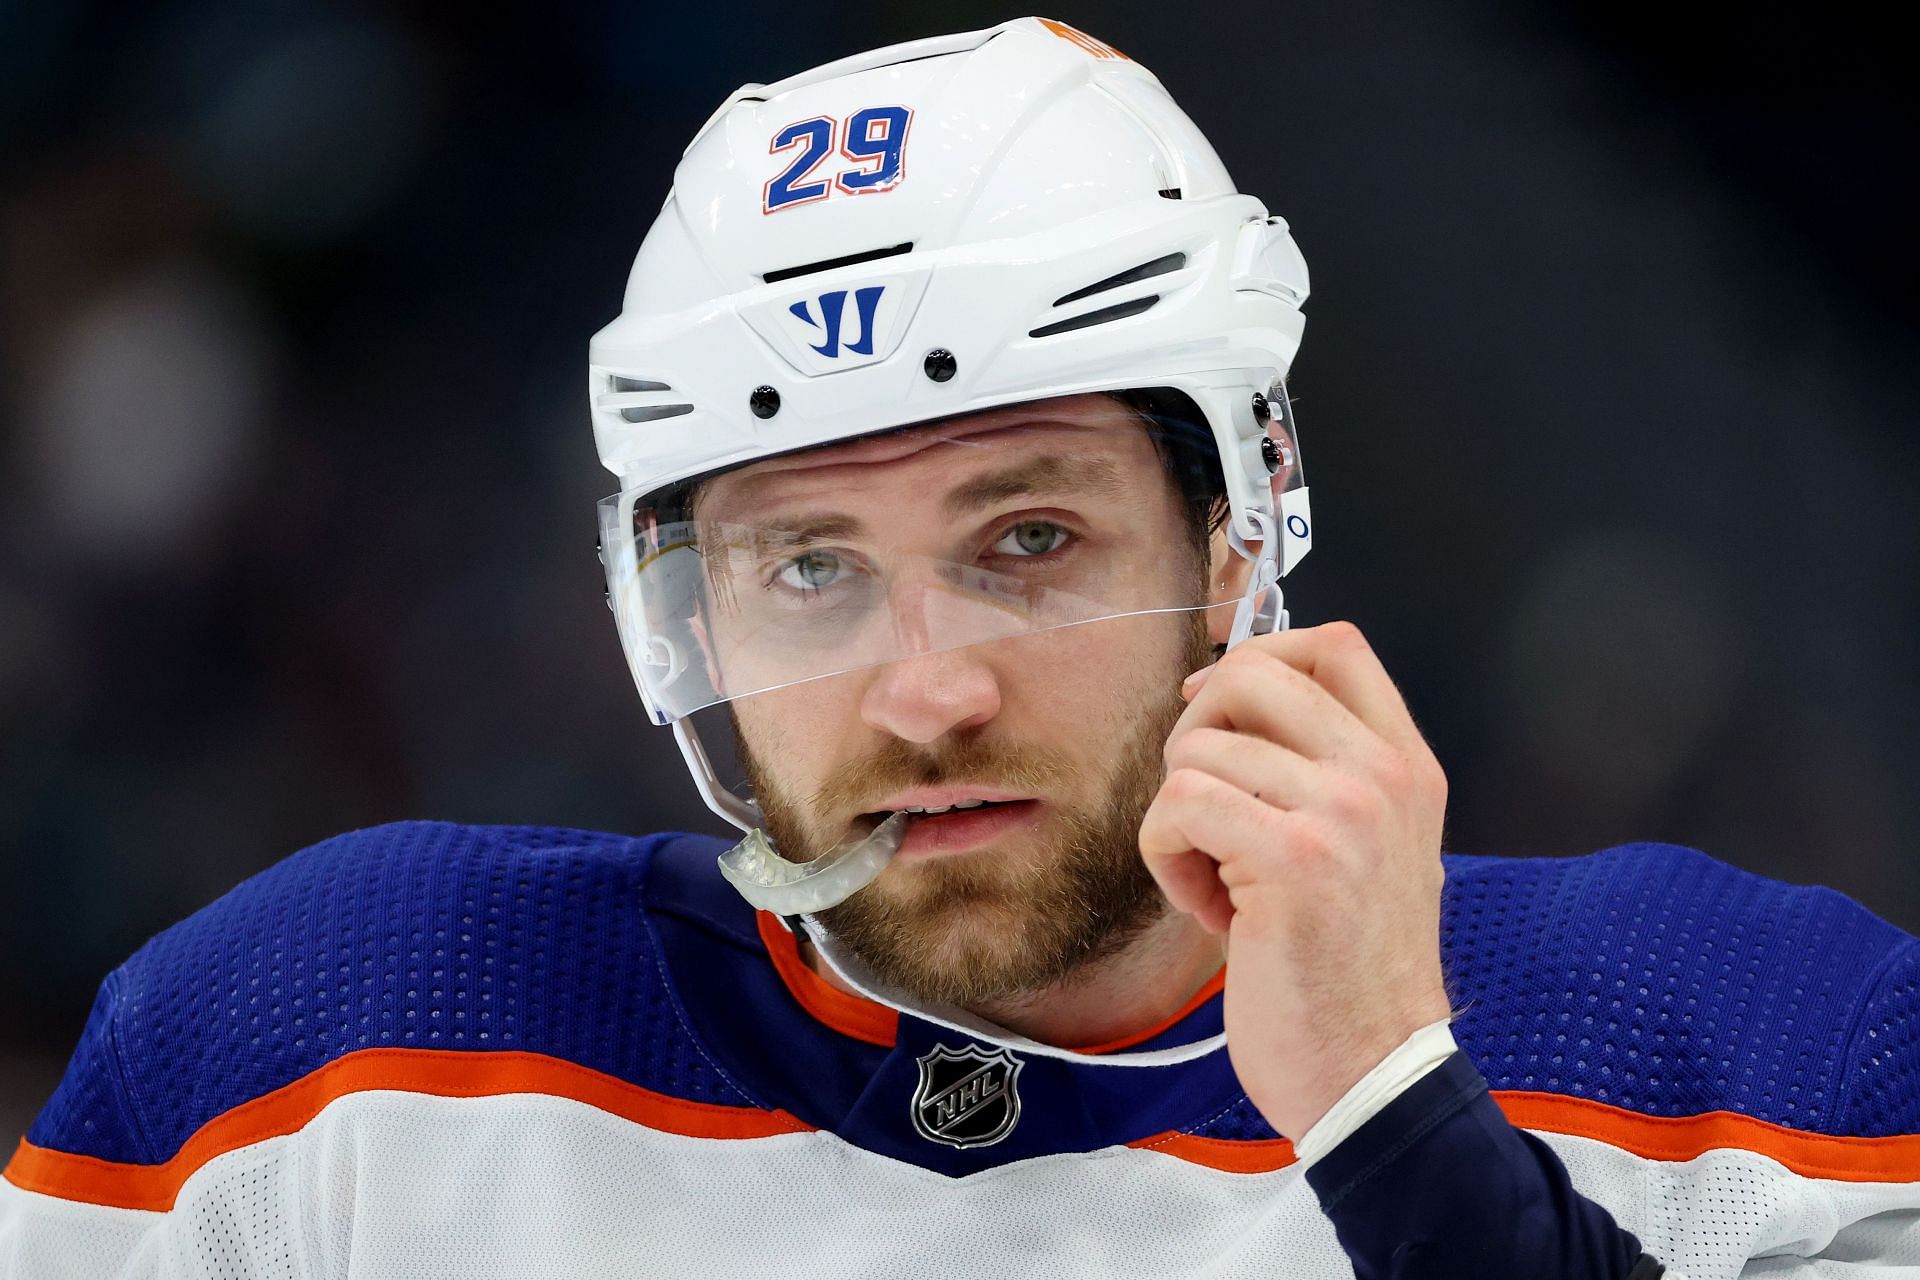 With Leon Draisaitl's contract extension looming, Oilers CEO speaks on